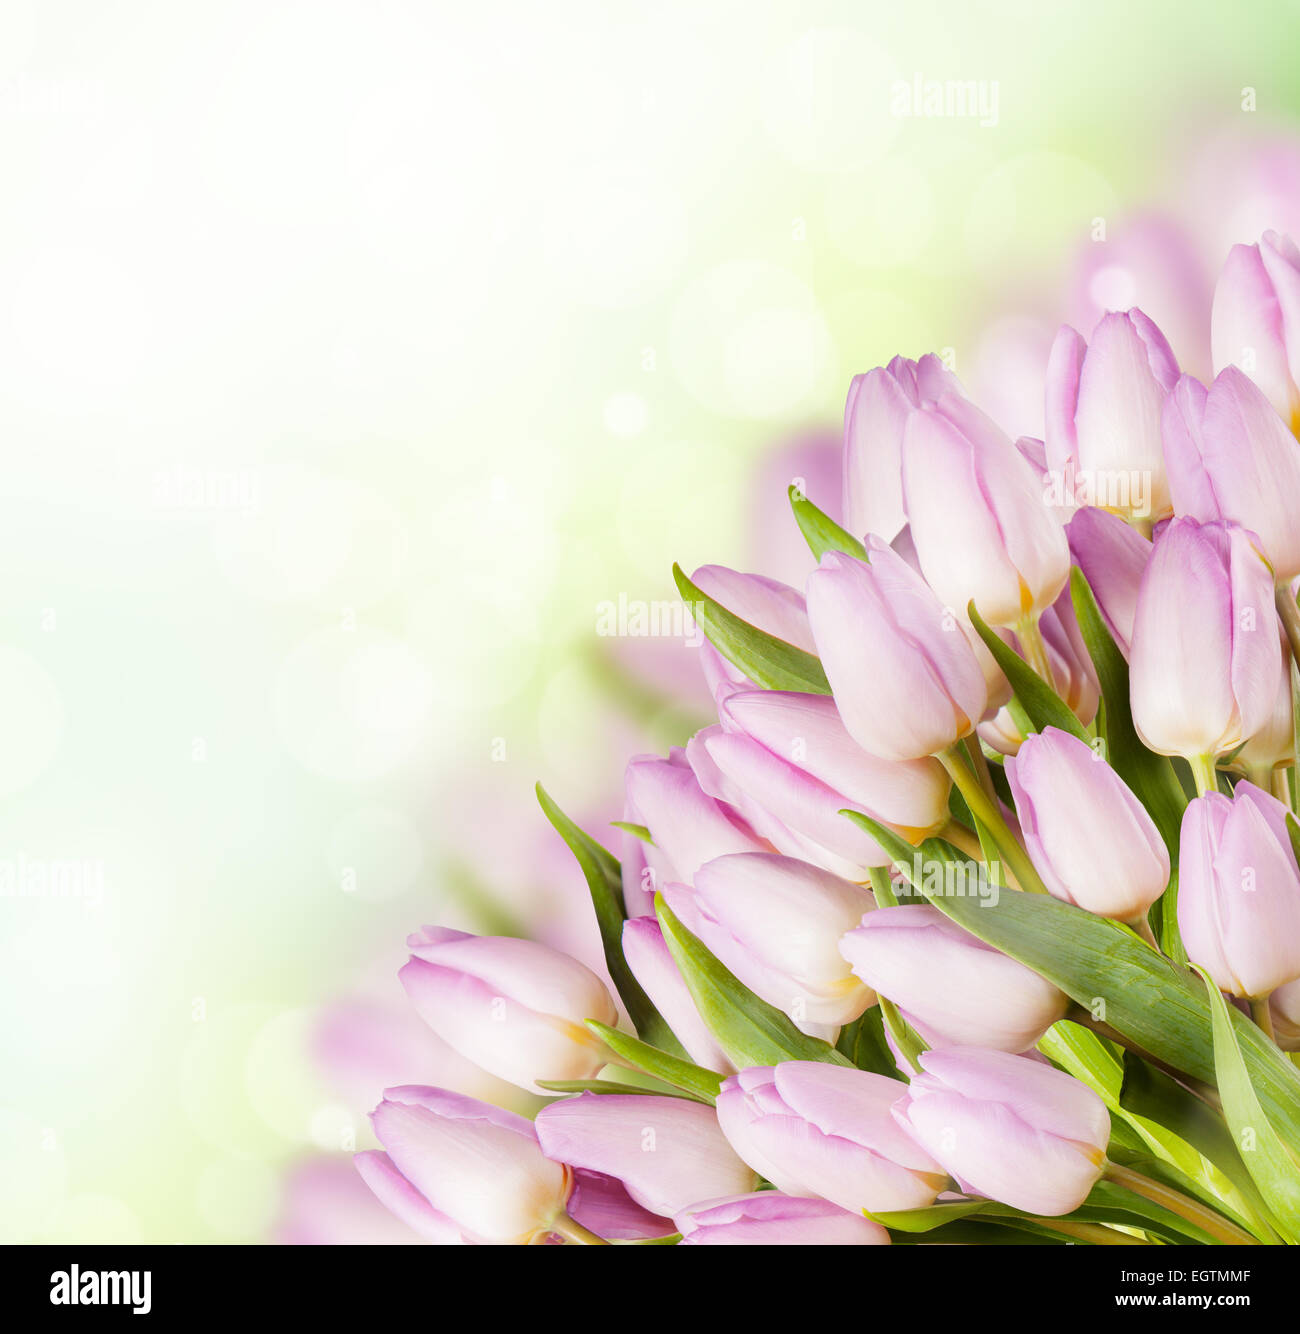 Boquet of pink tulips with copyspace for text Stock Photo